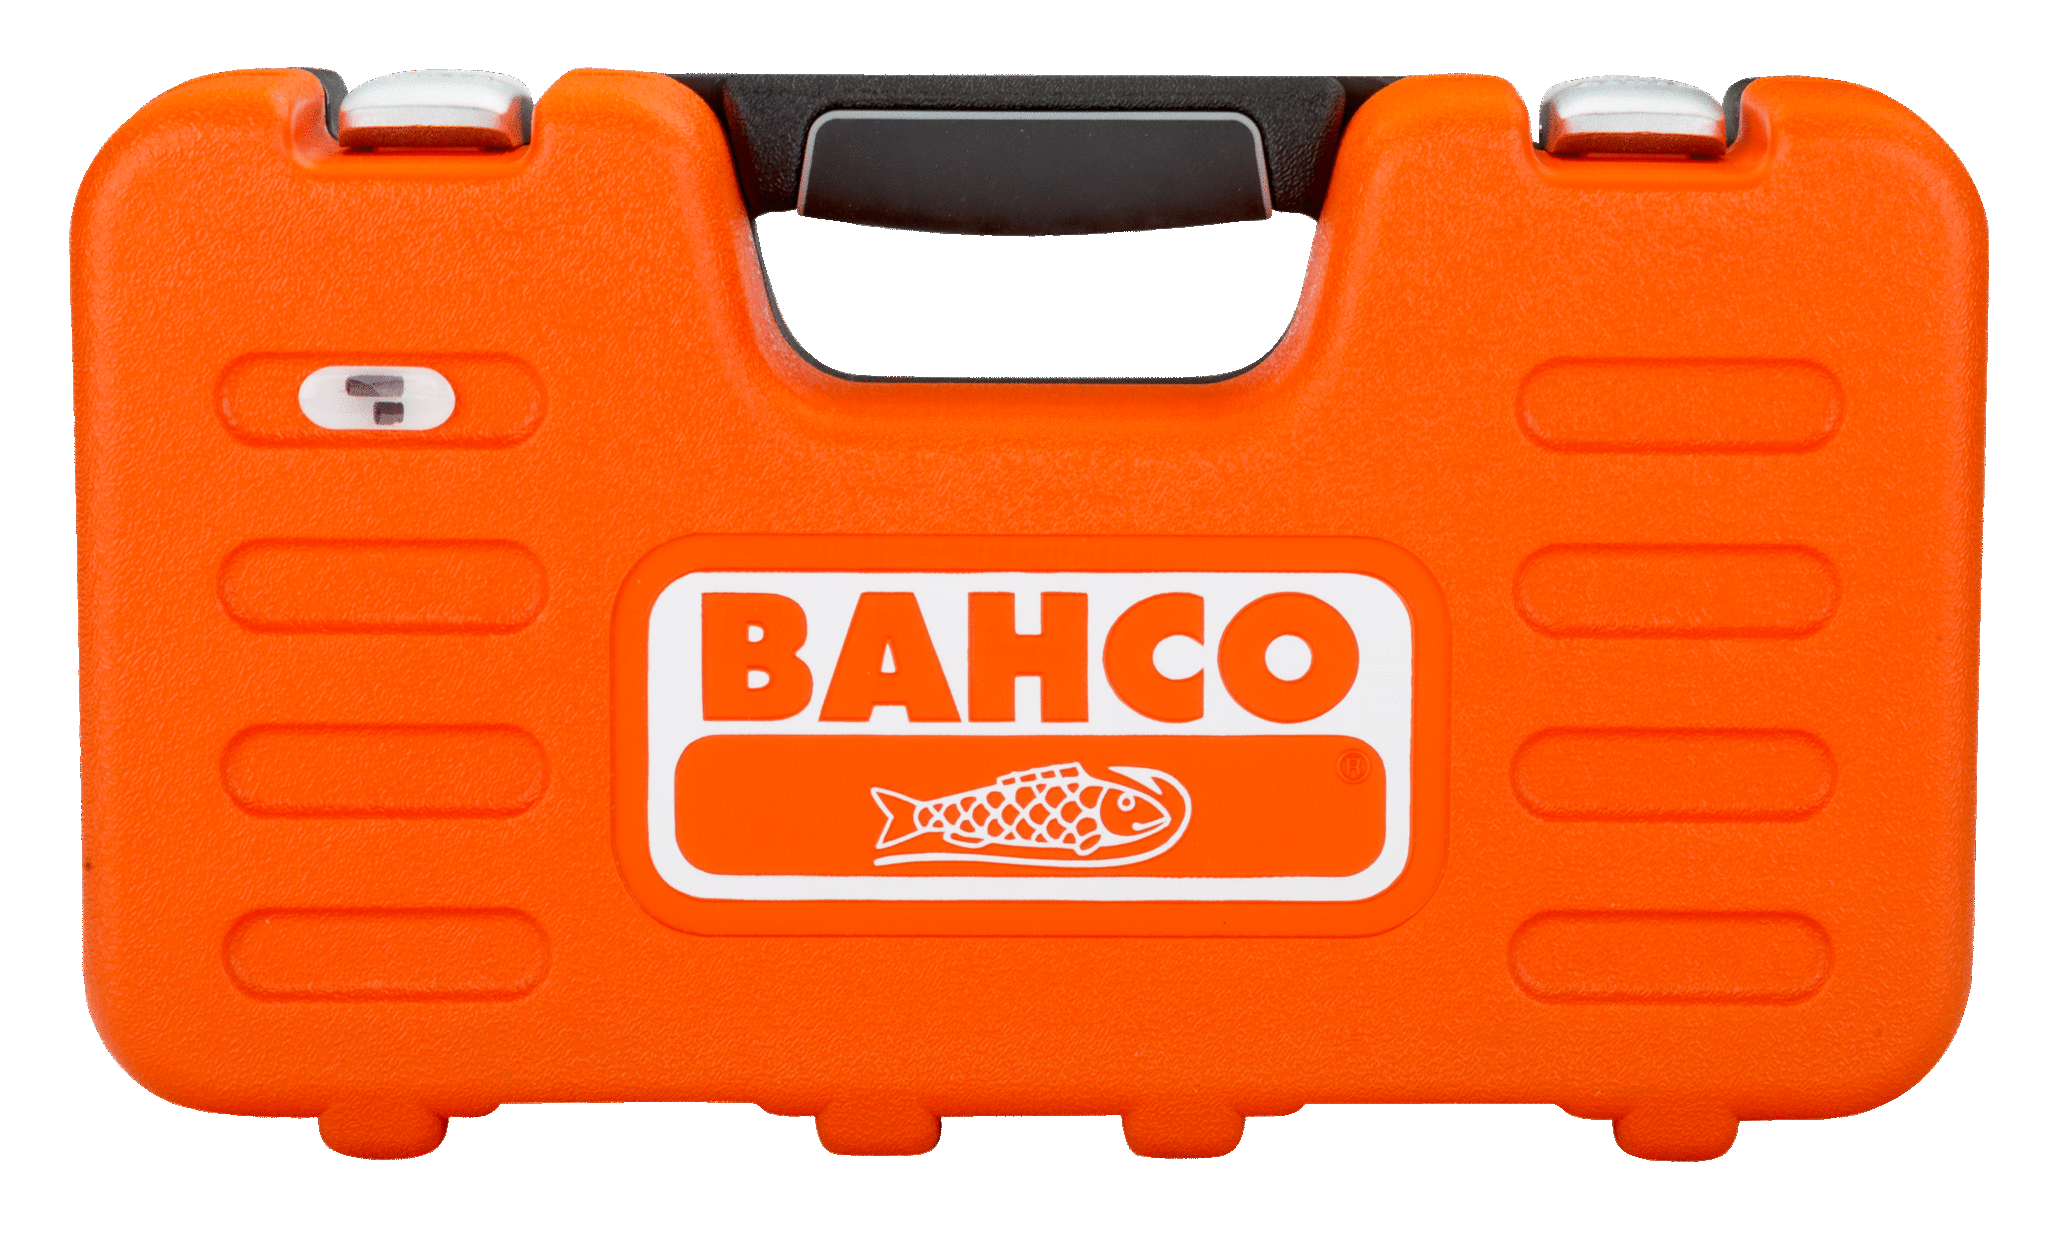 20Pce 1/2" Square Drive Mixed Impact Socket Set with Metric Hex Profile and Phosphate Finish D-DD/S20 by Bahco